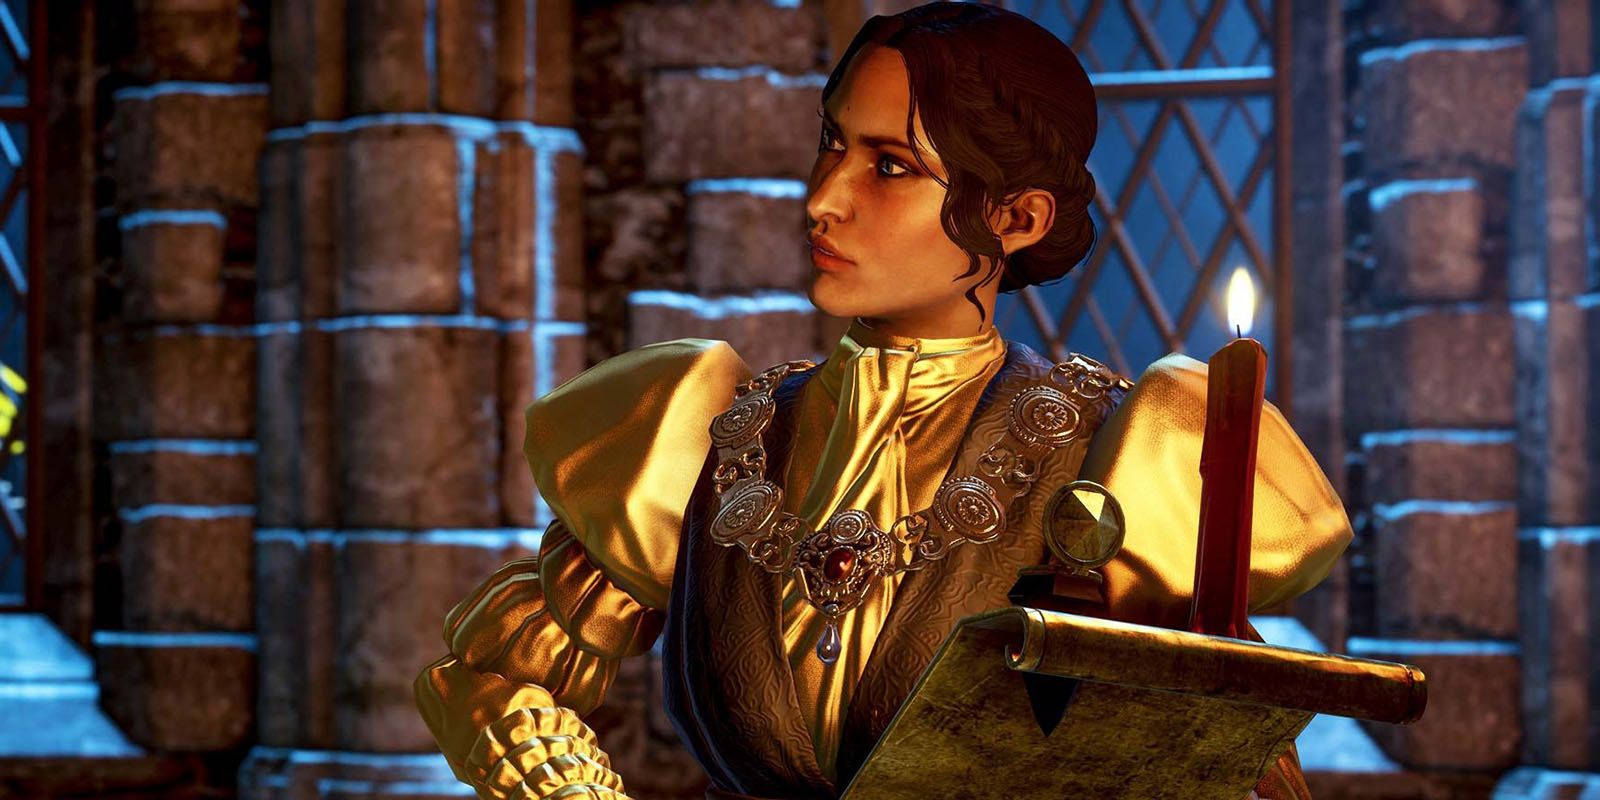 Josephine looking to the left in Dragon Age: Inquisition